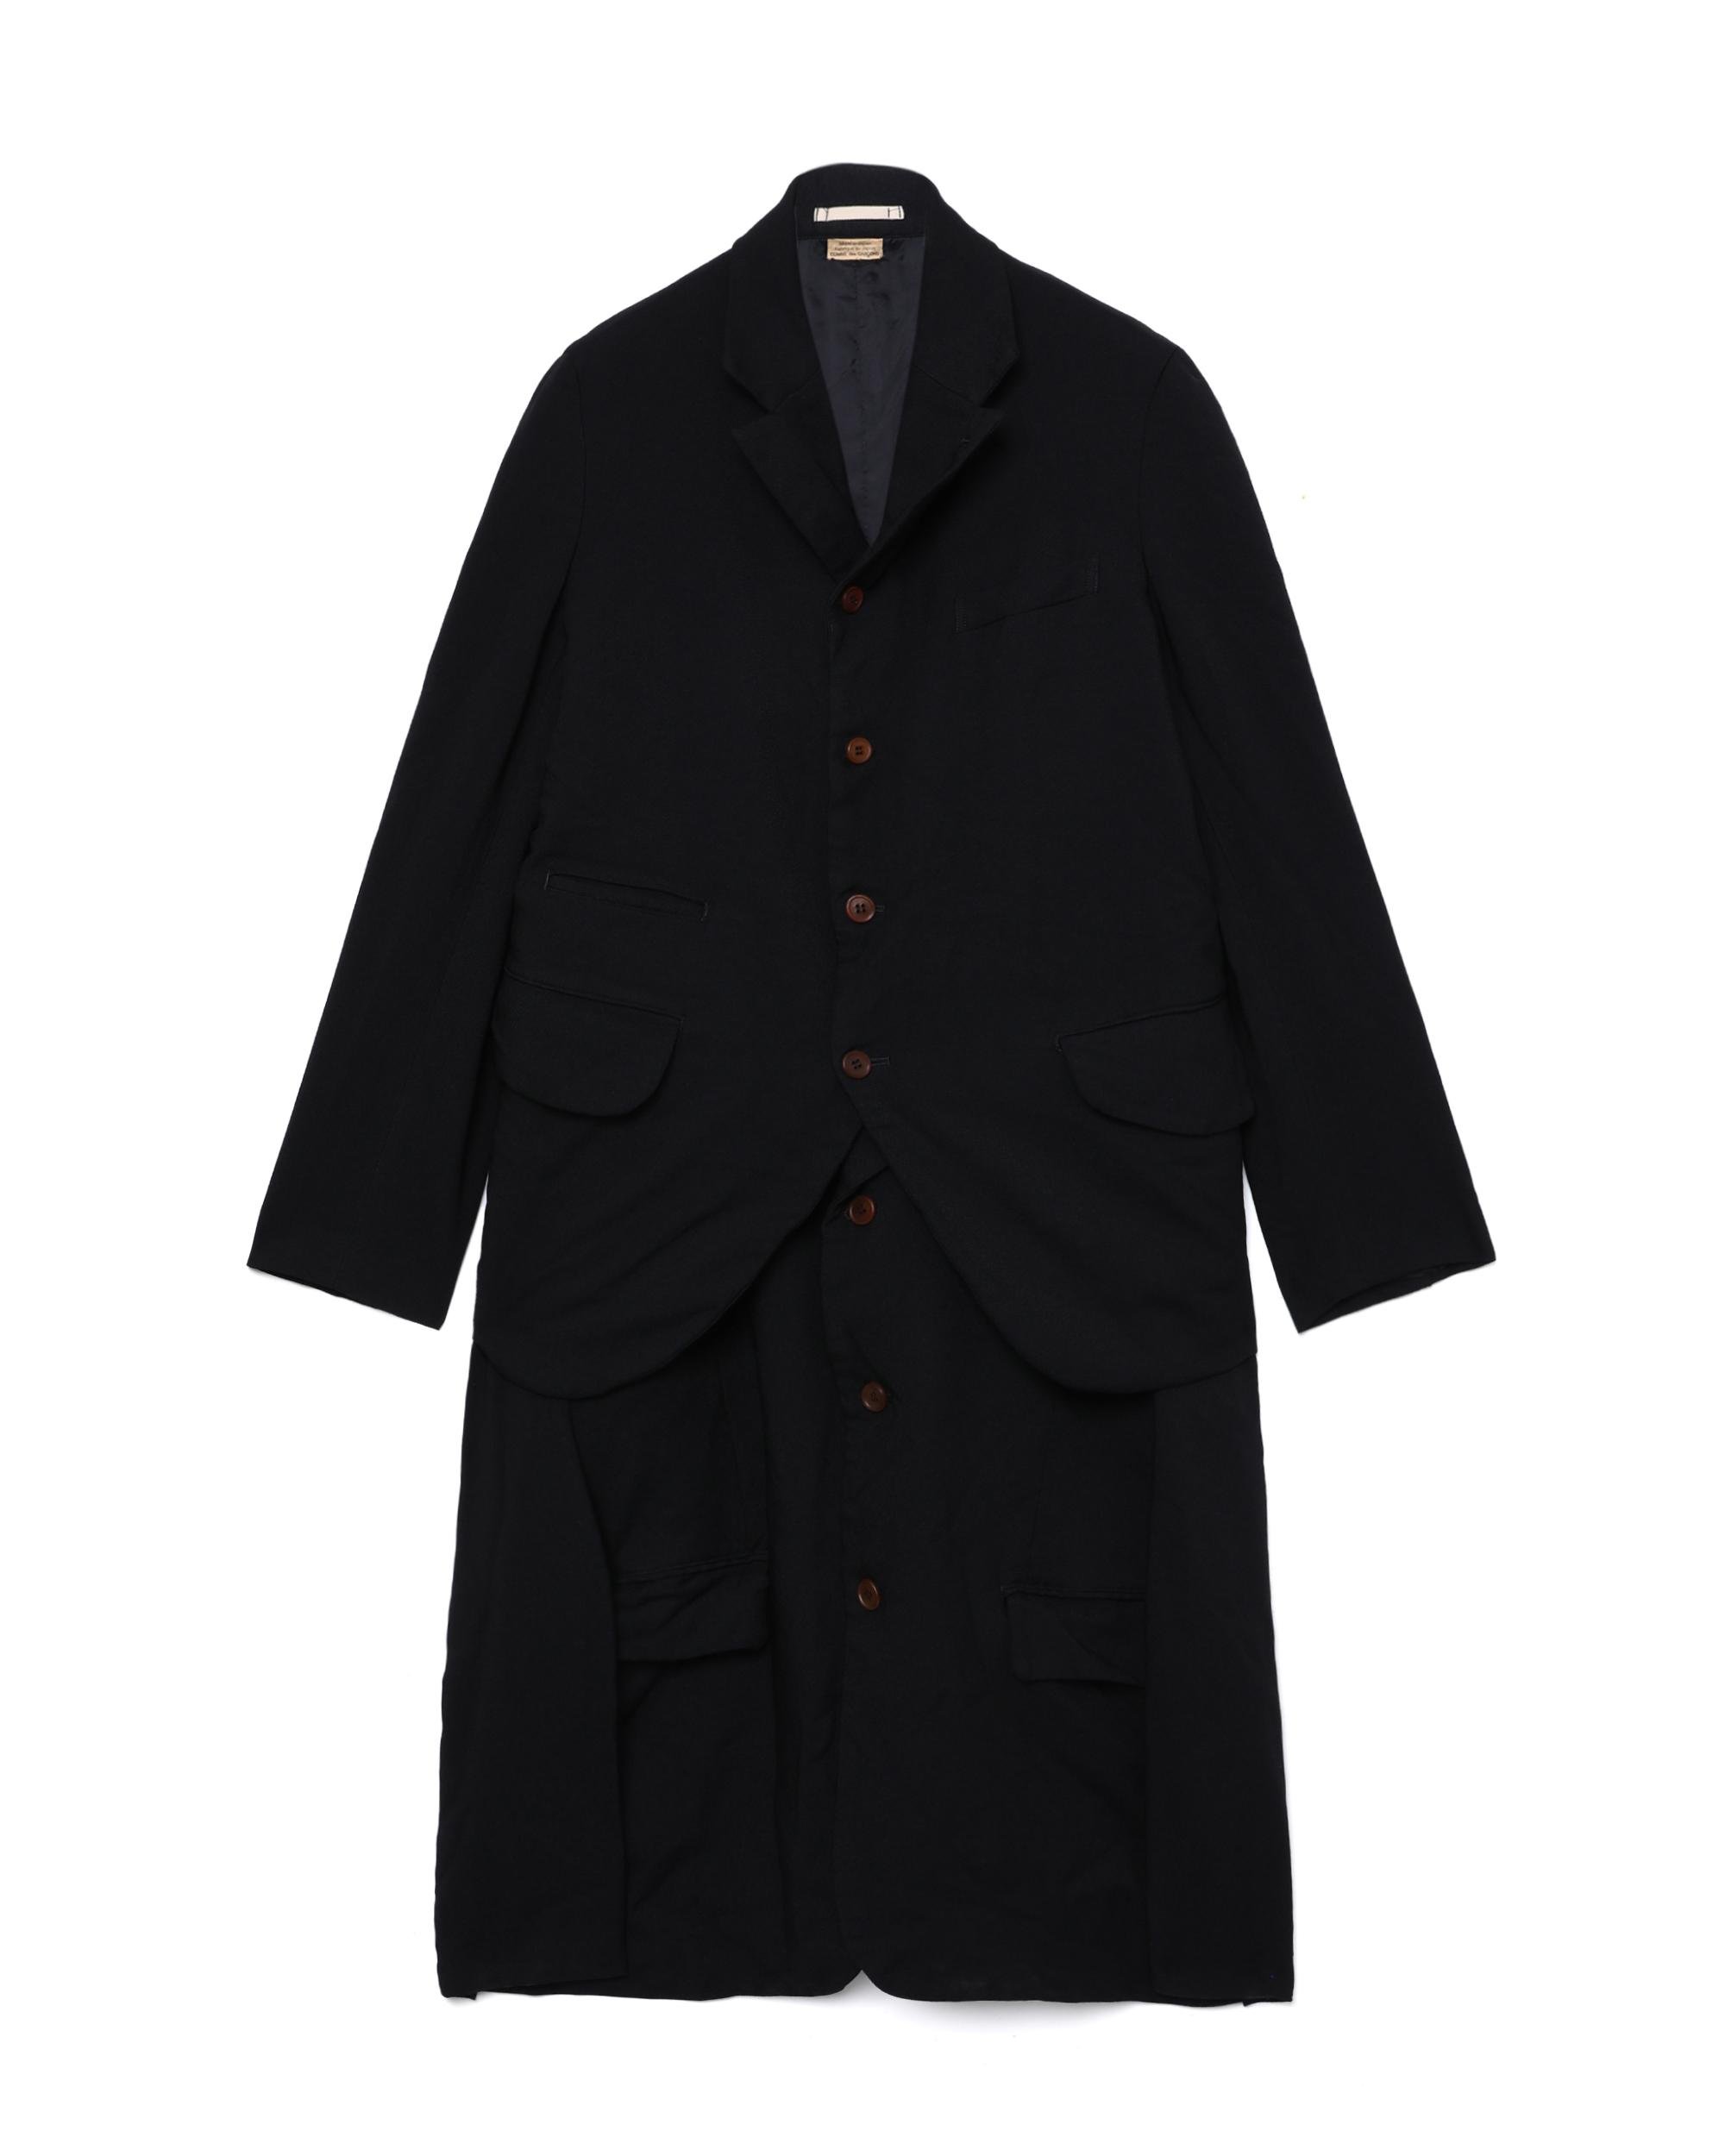 Extention overcoat by COMME DES GARCONS